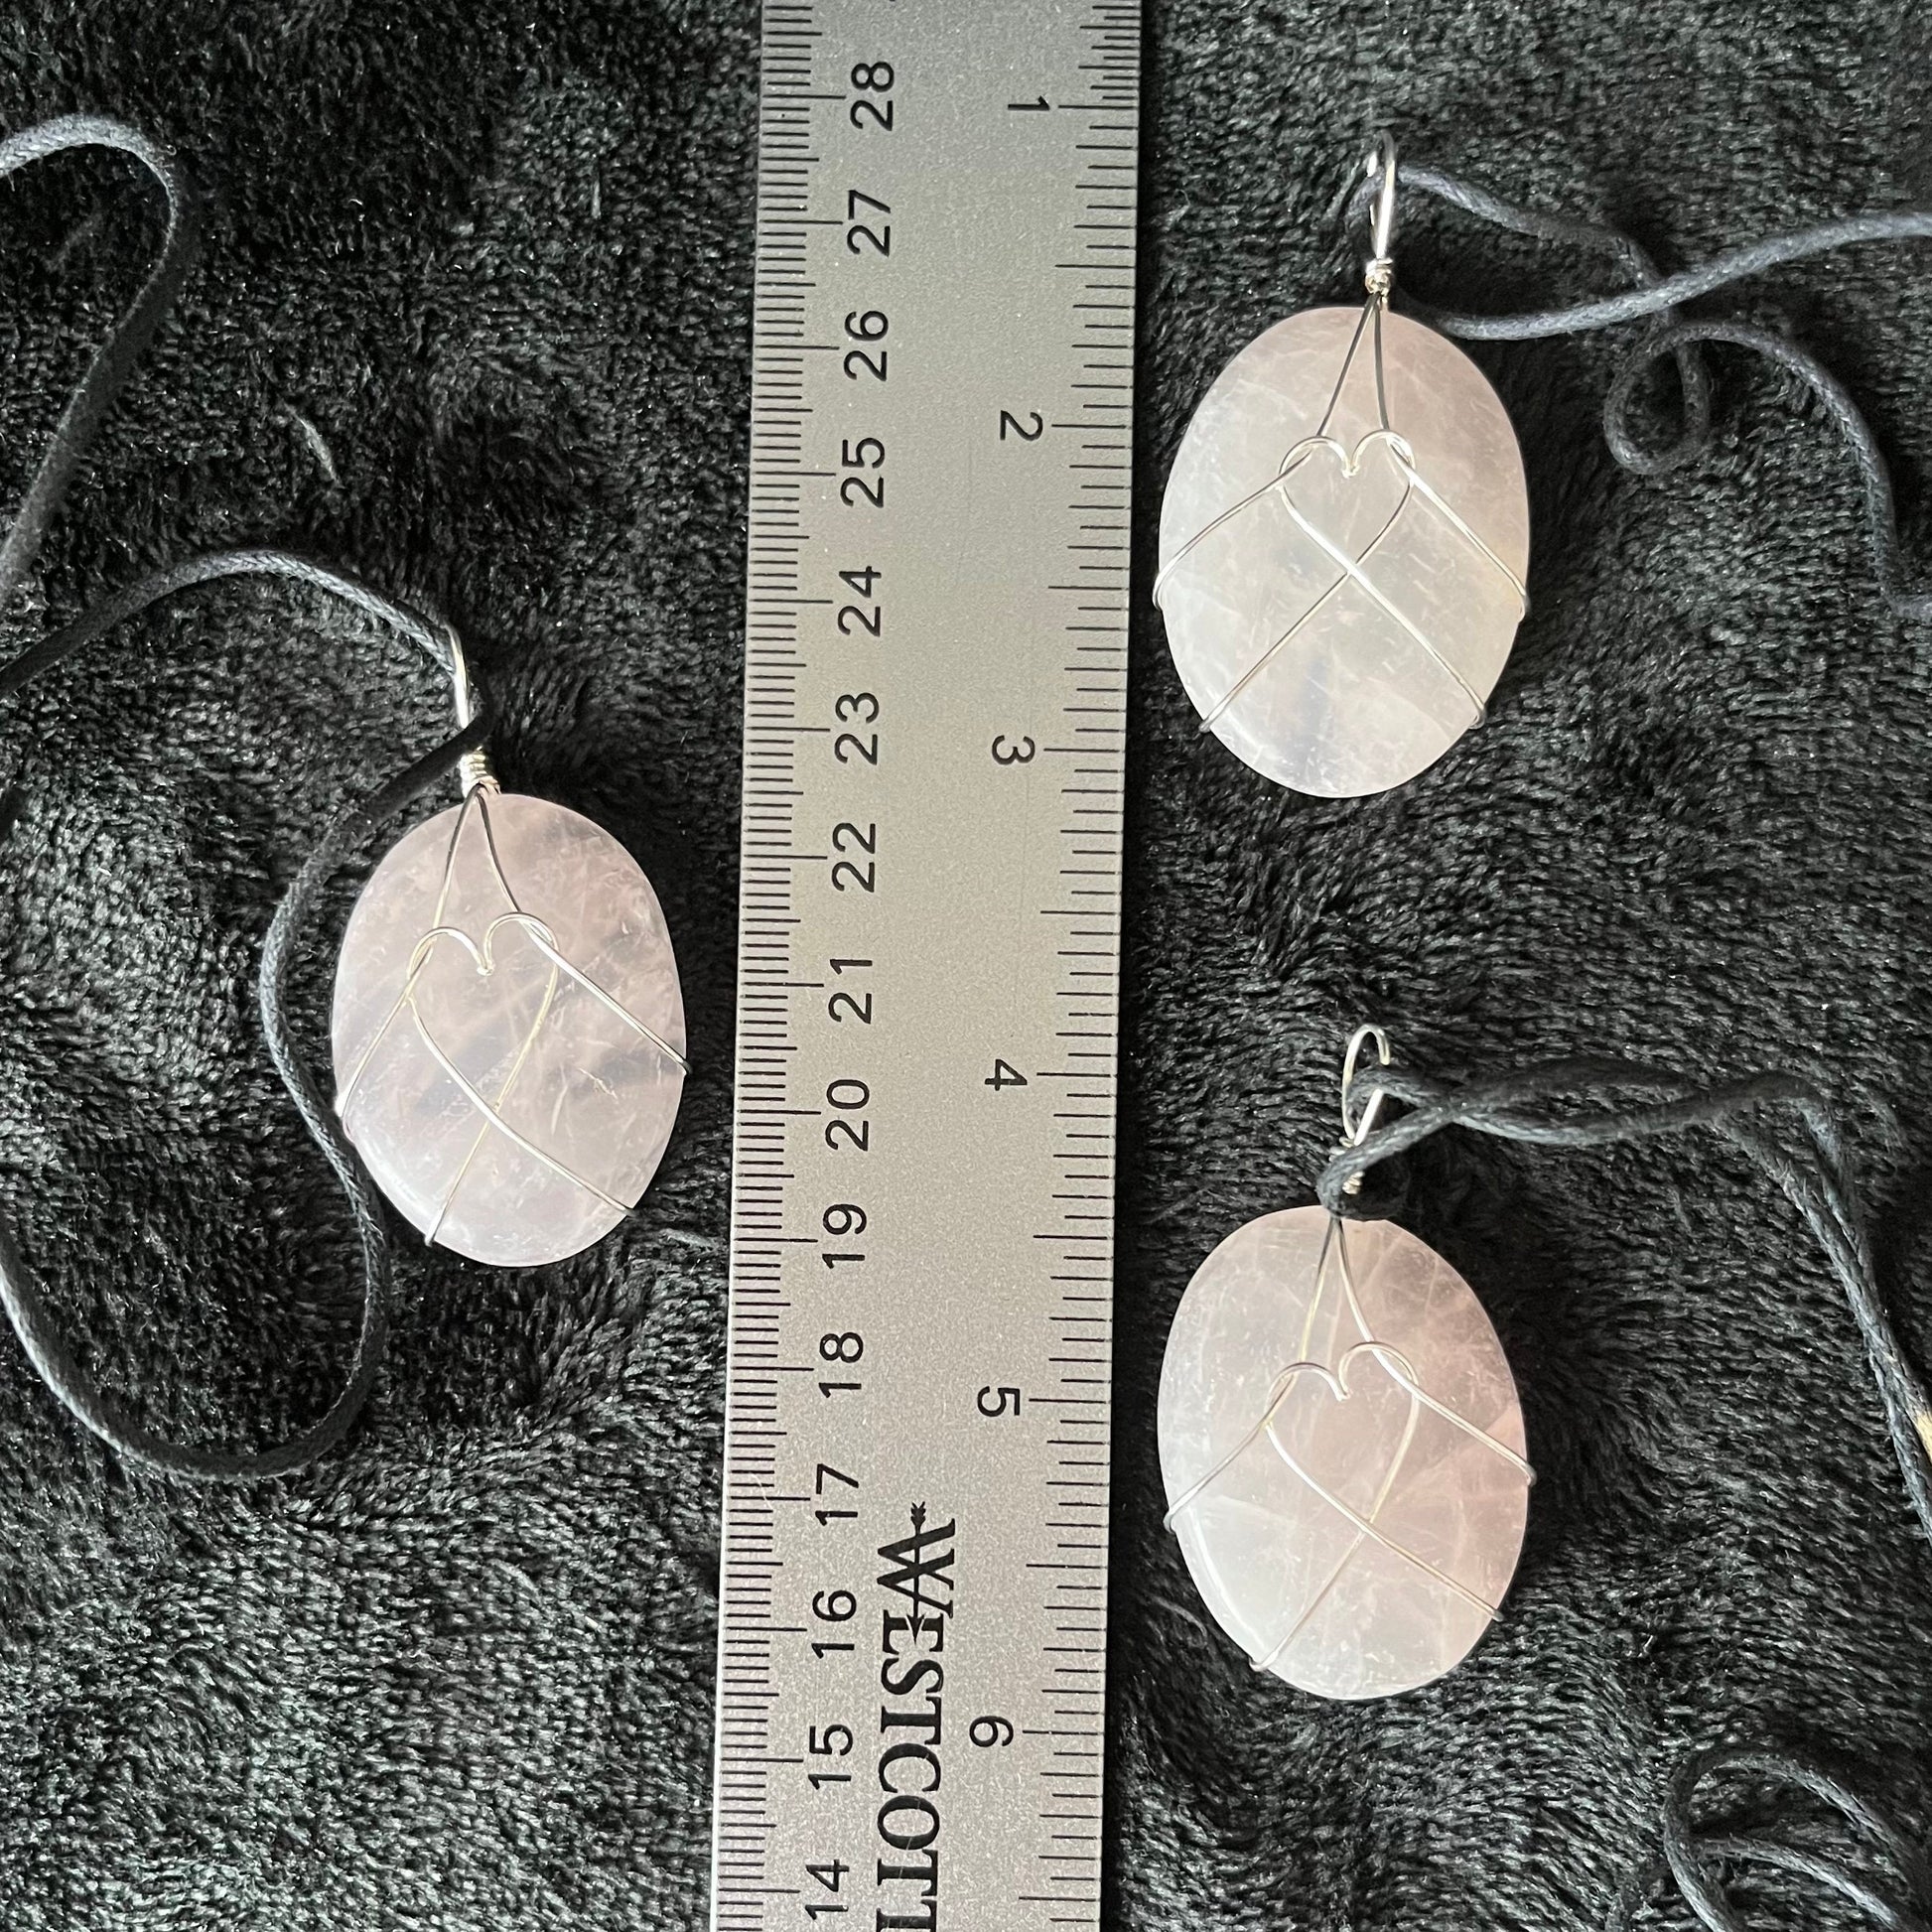 3 ornately silver wire wrapped translicent pink rose quartz worry stone pendants, approximately 1 1/4" long, attarched to adjustable black cords, displayed next to a ruler. The ailver wire male a heart shape in the center pf the rose quartz stone.